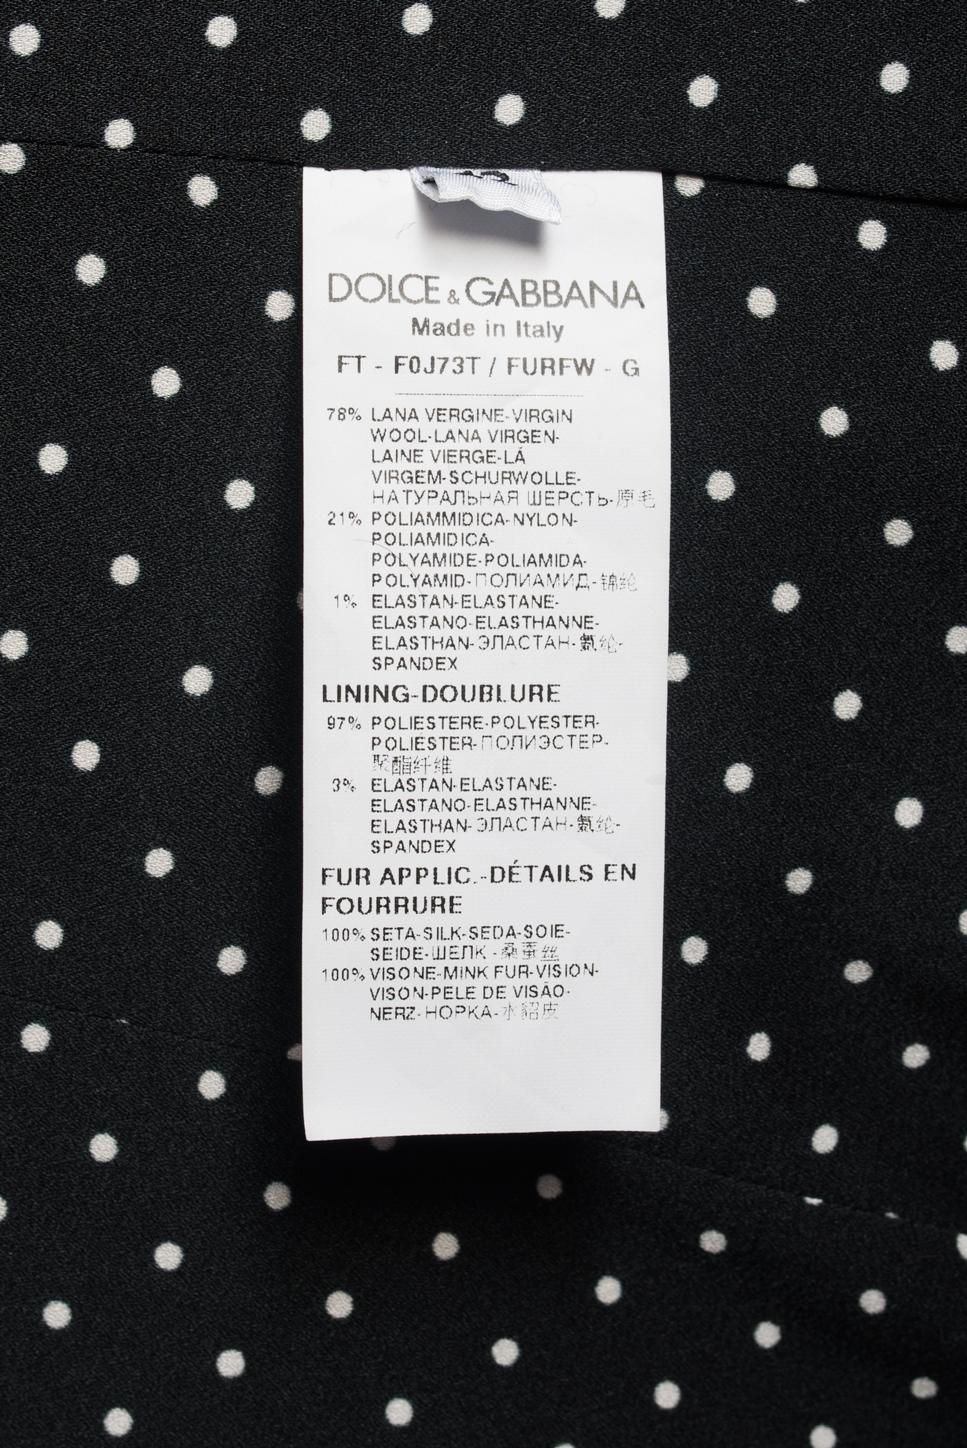 Dolce & Gabbana Charcoal Grey Mink Collar Wool Coat with Jewel Buttons - S 4